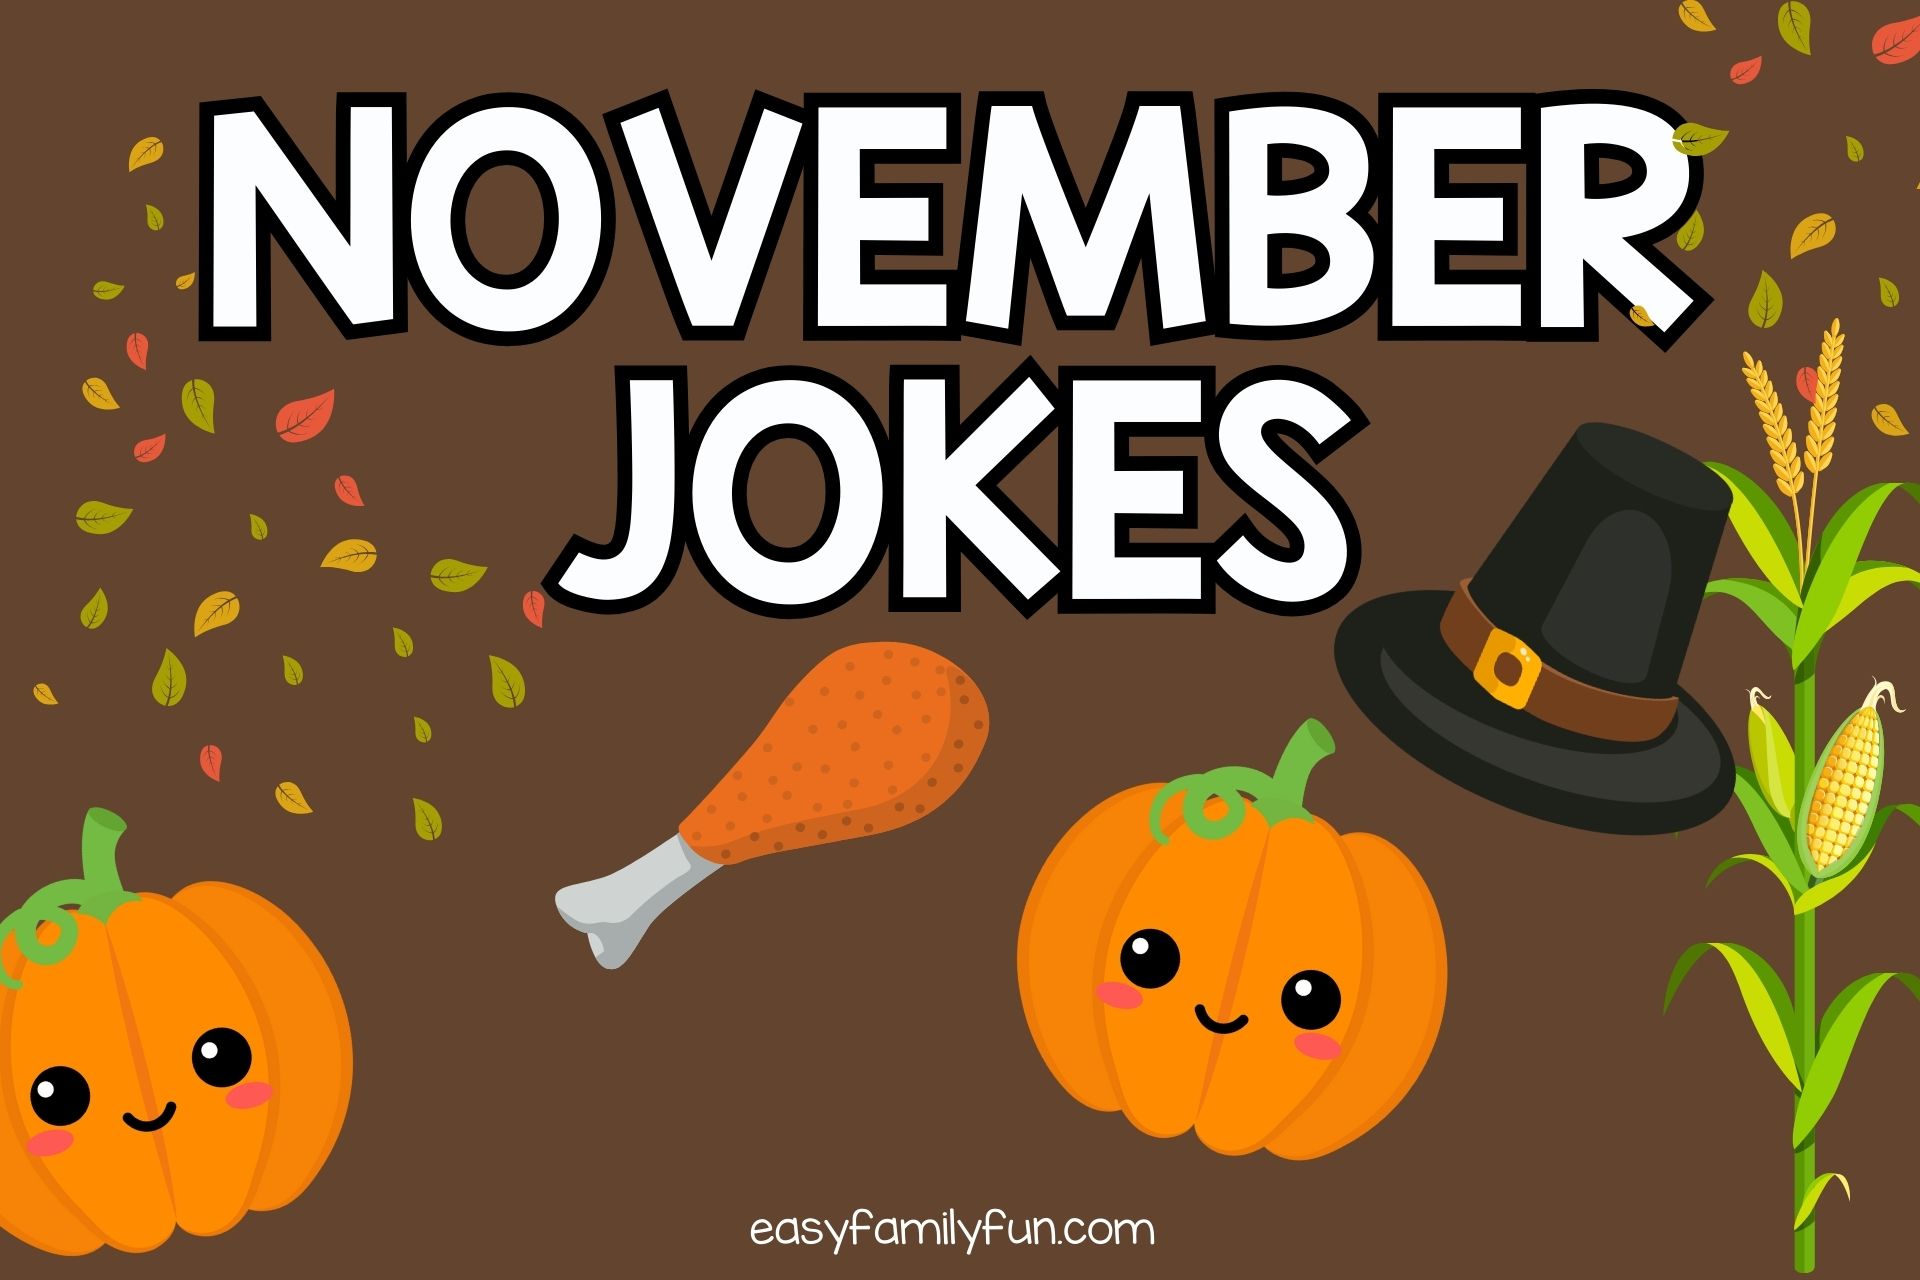 featured image in dark brown background, white text saying "November jokes"